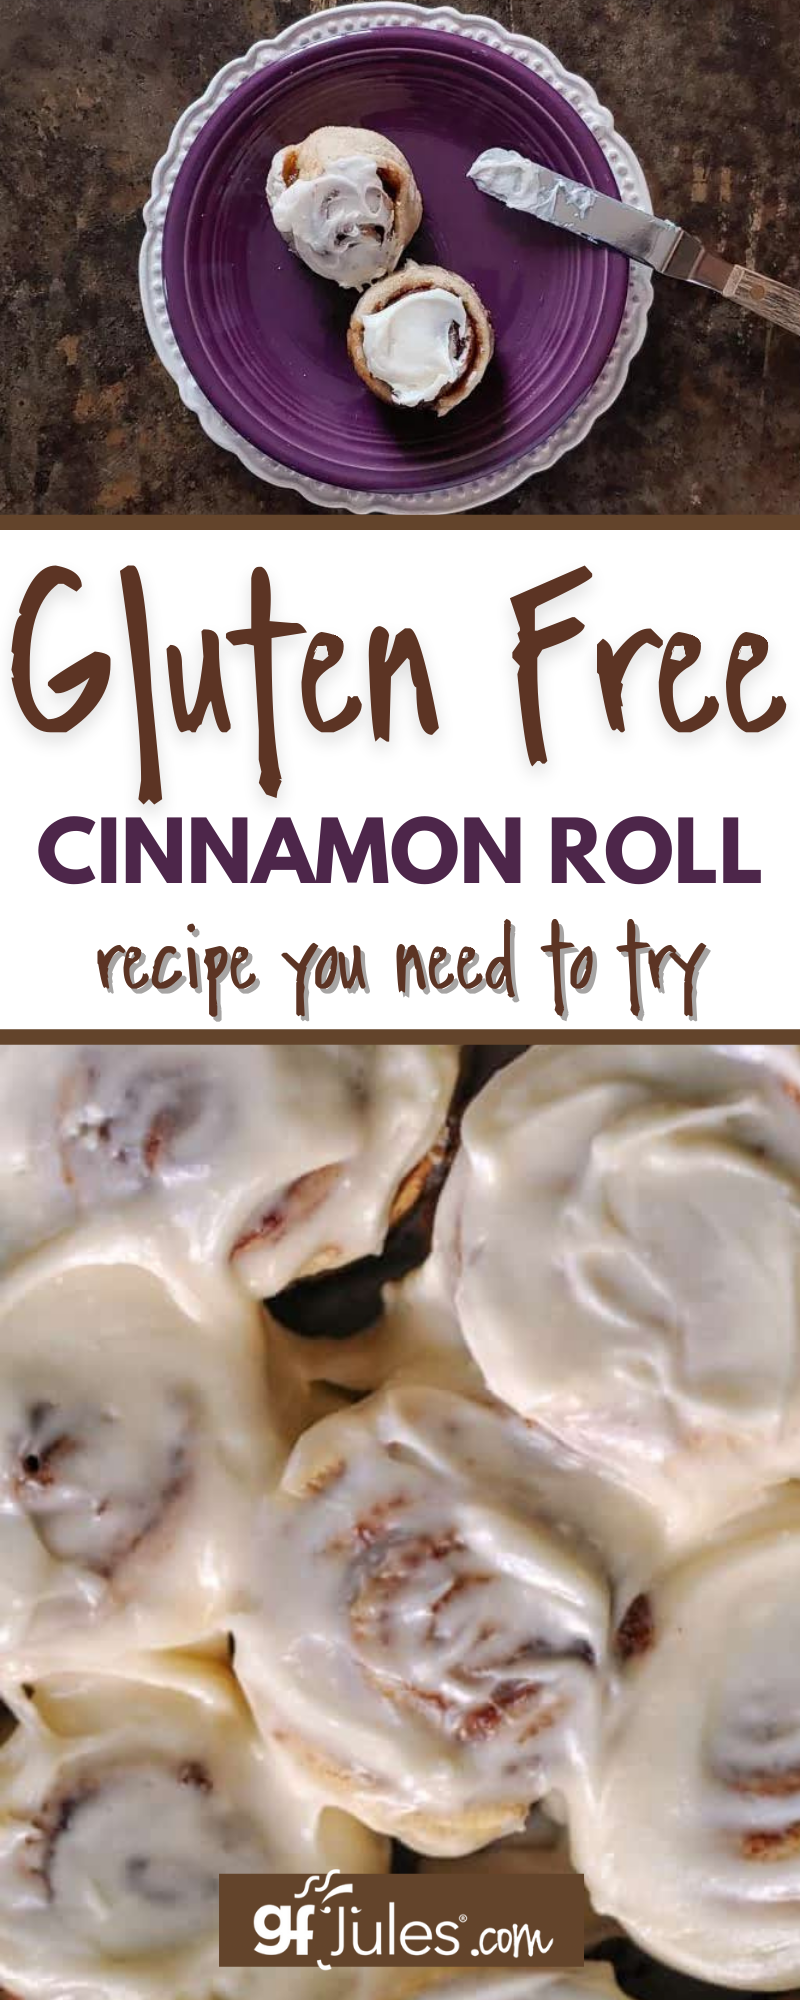 Gluten Free Cinnamon Roll Recipe You Need To Try